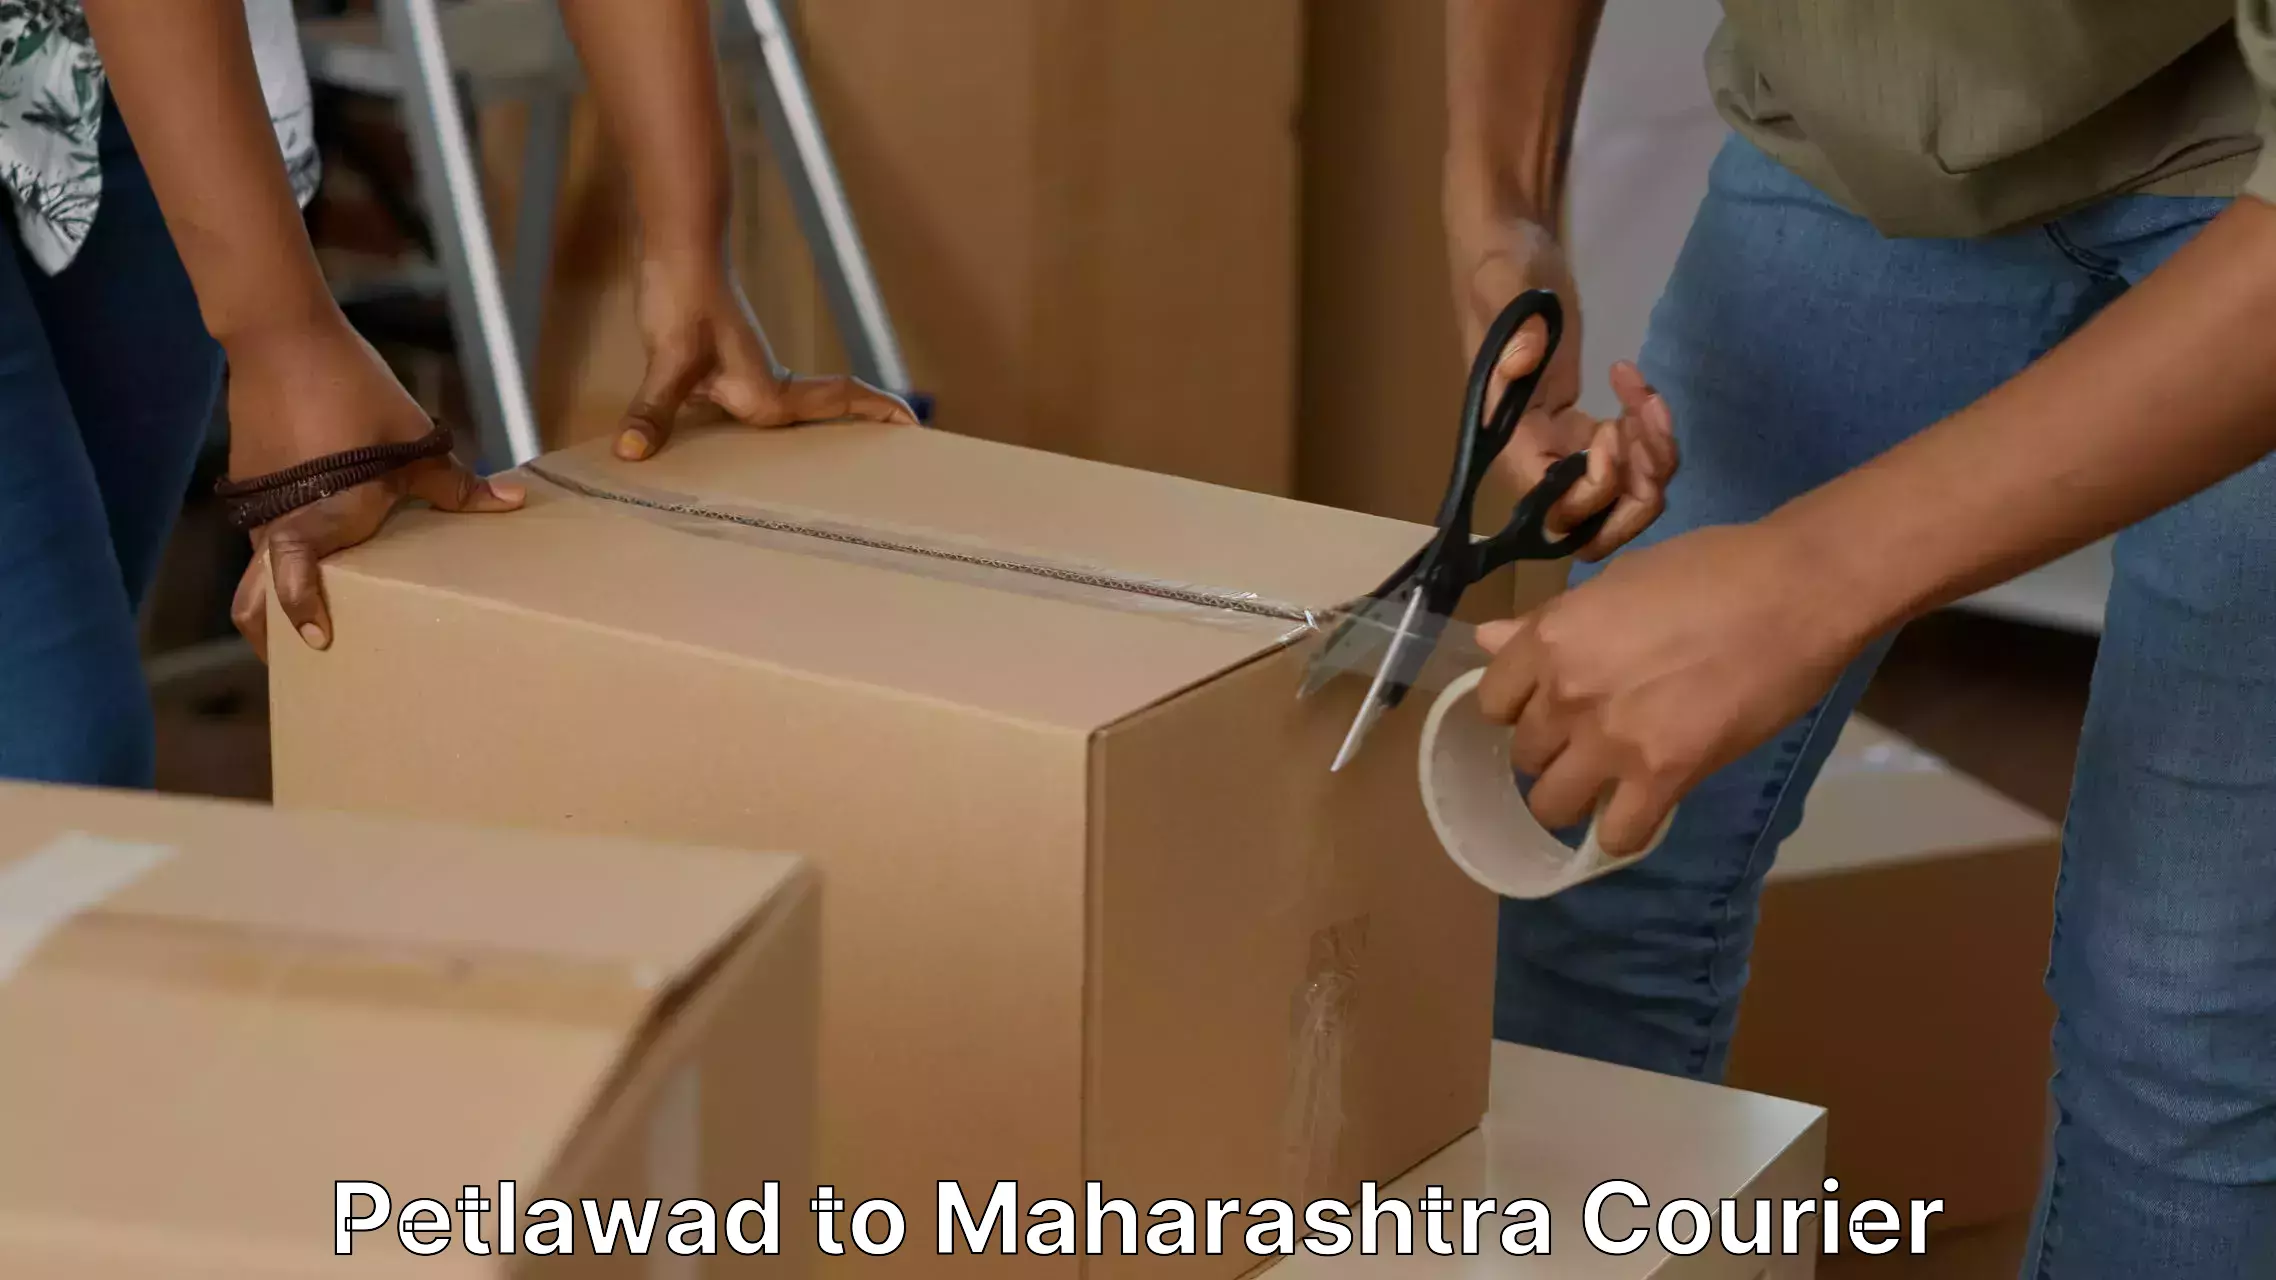 Reliable moving assistance Petlawad to IIT Mumbai